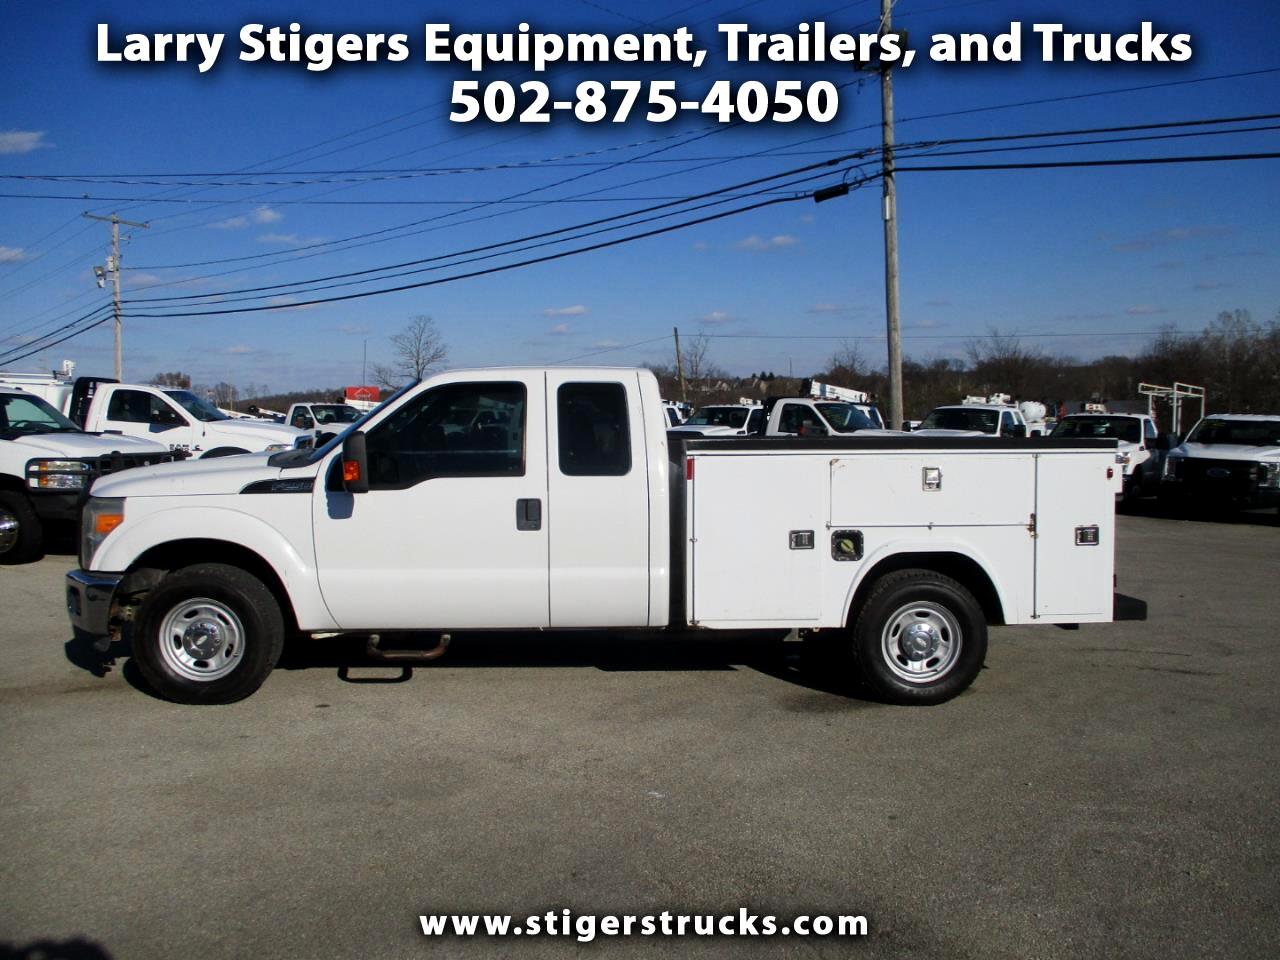 Ford F-250 SD XL SuperCab Long Bed 2WD 2011